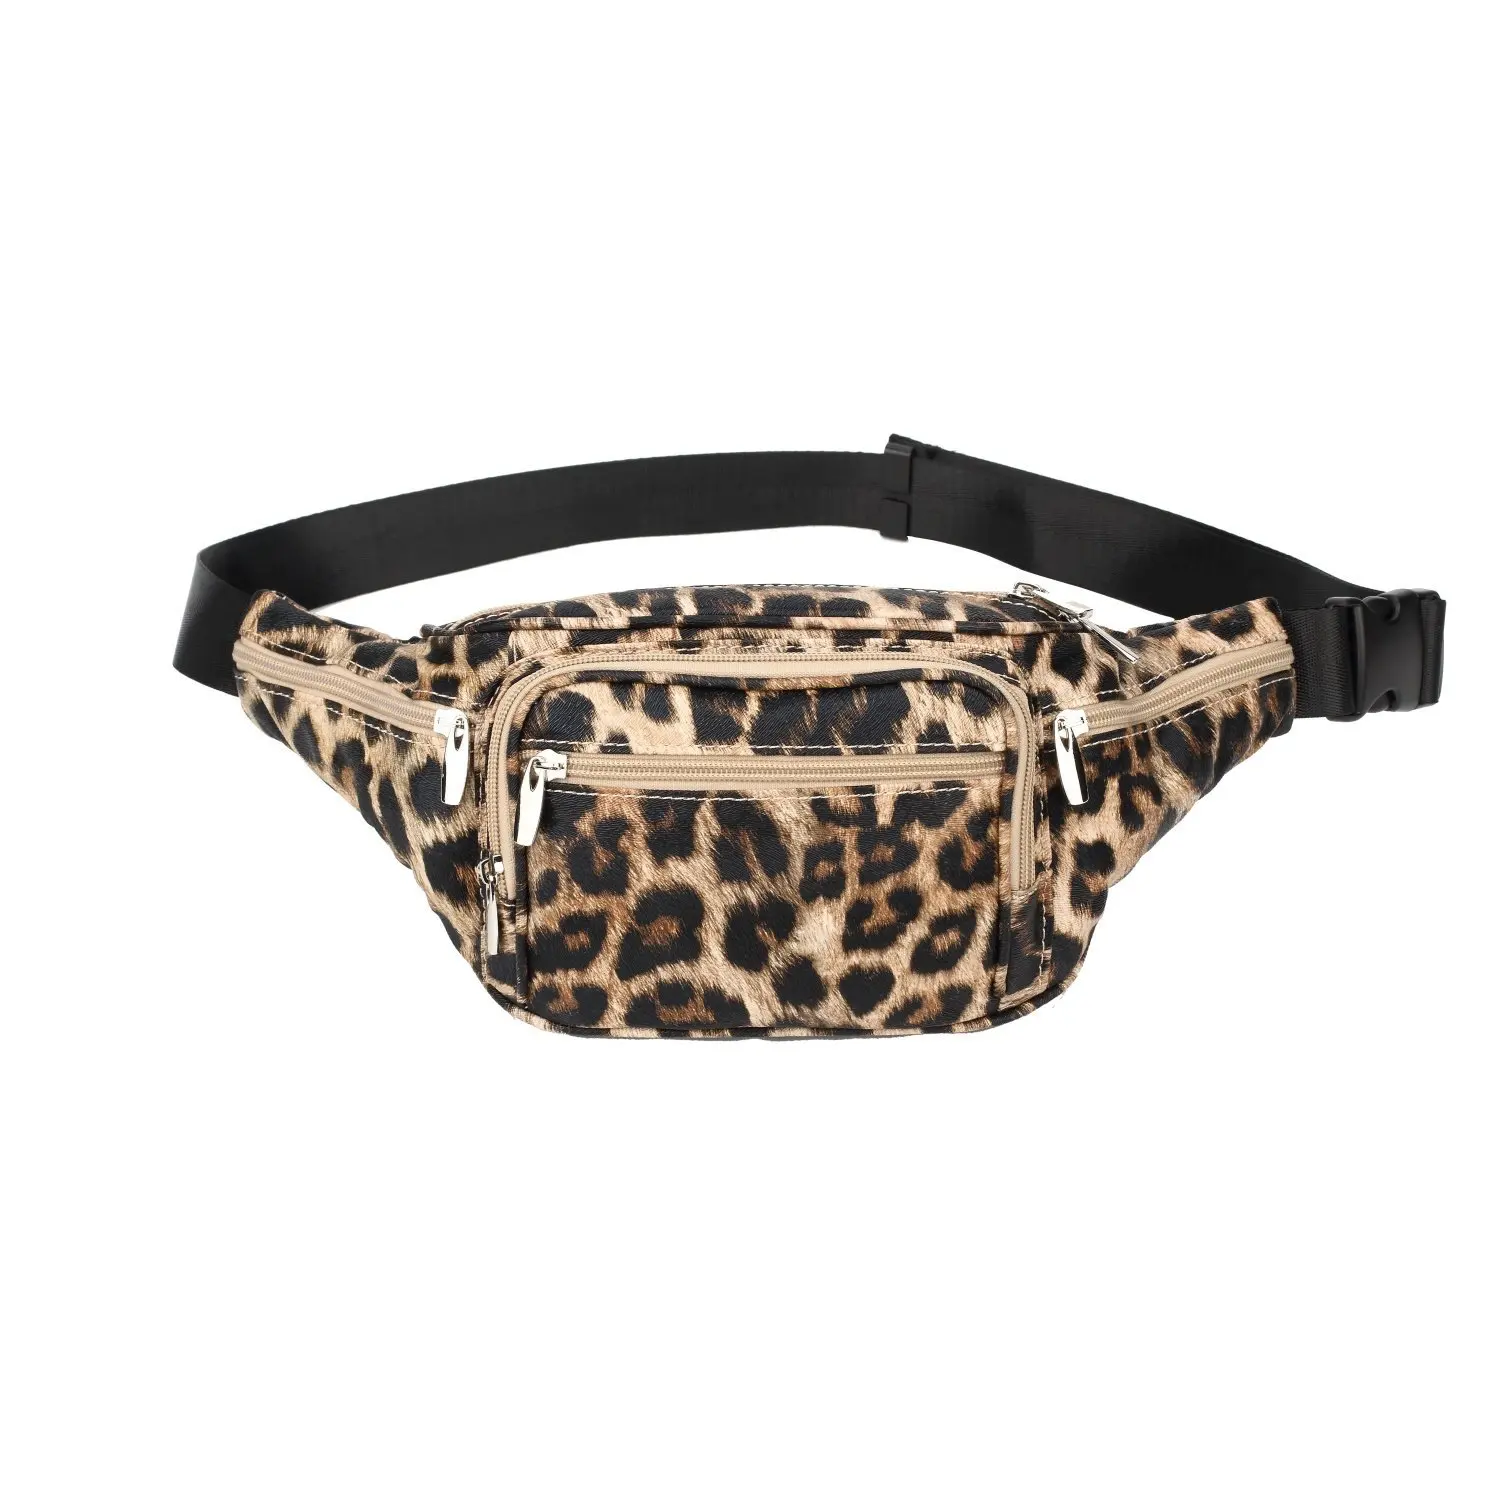 Cheetah Colorful Funny Sport Waist Pack Fanny Pack Adjustable For Travel